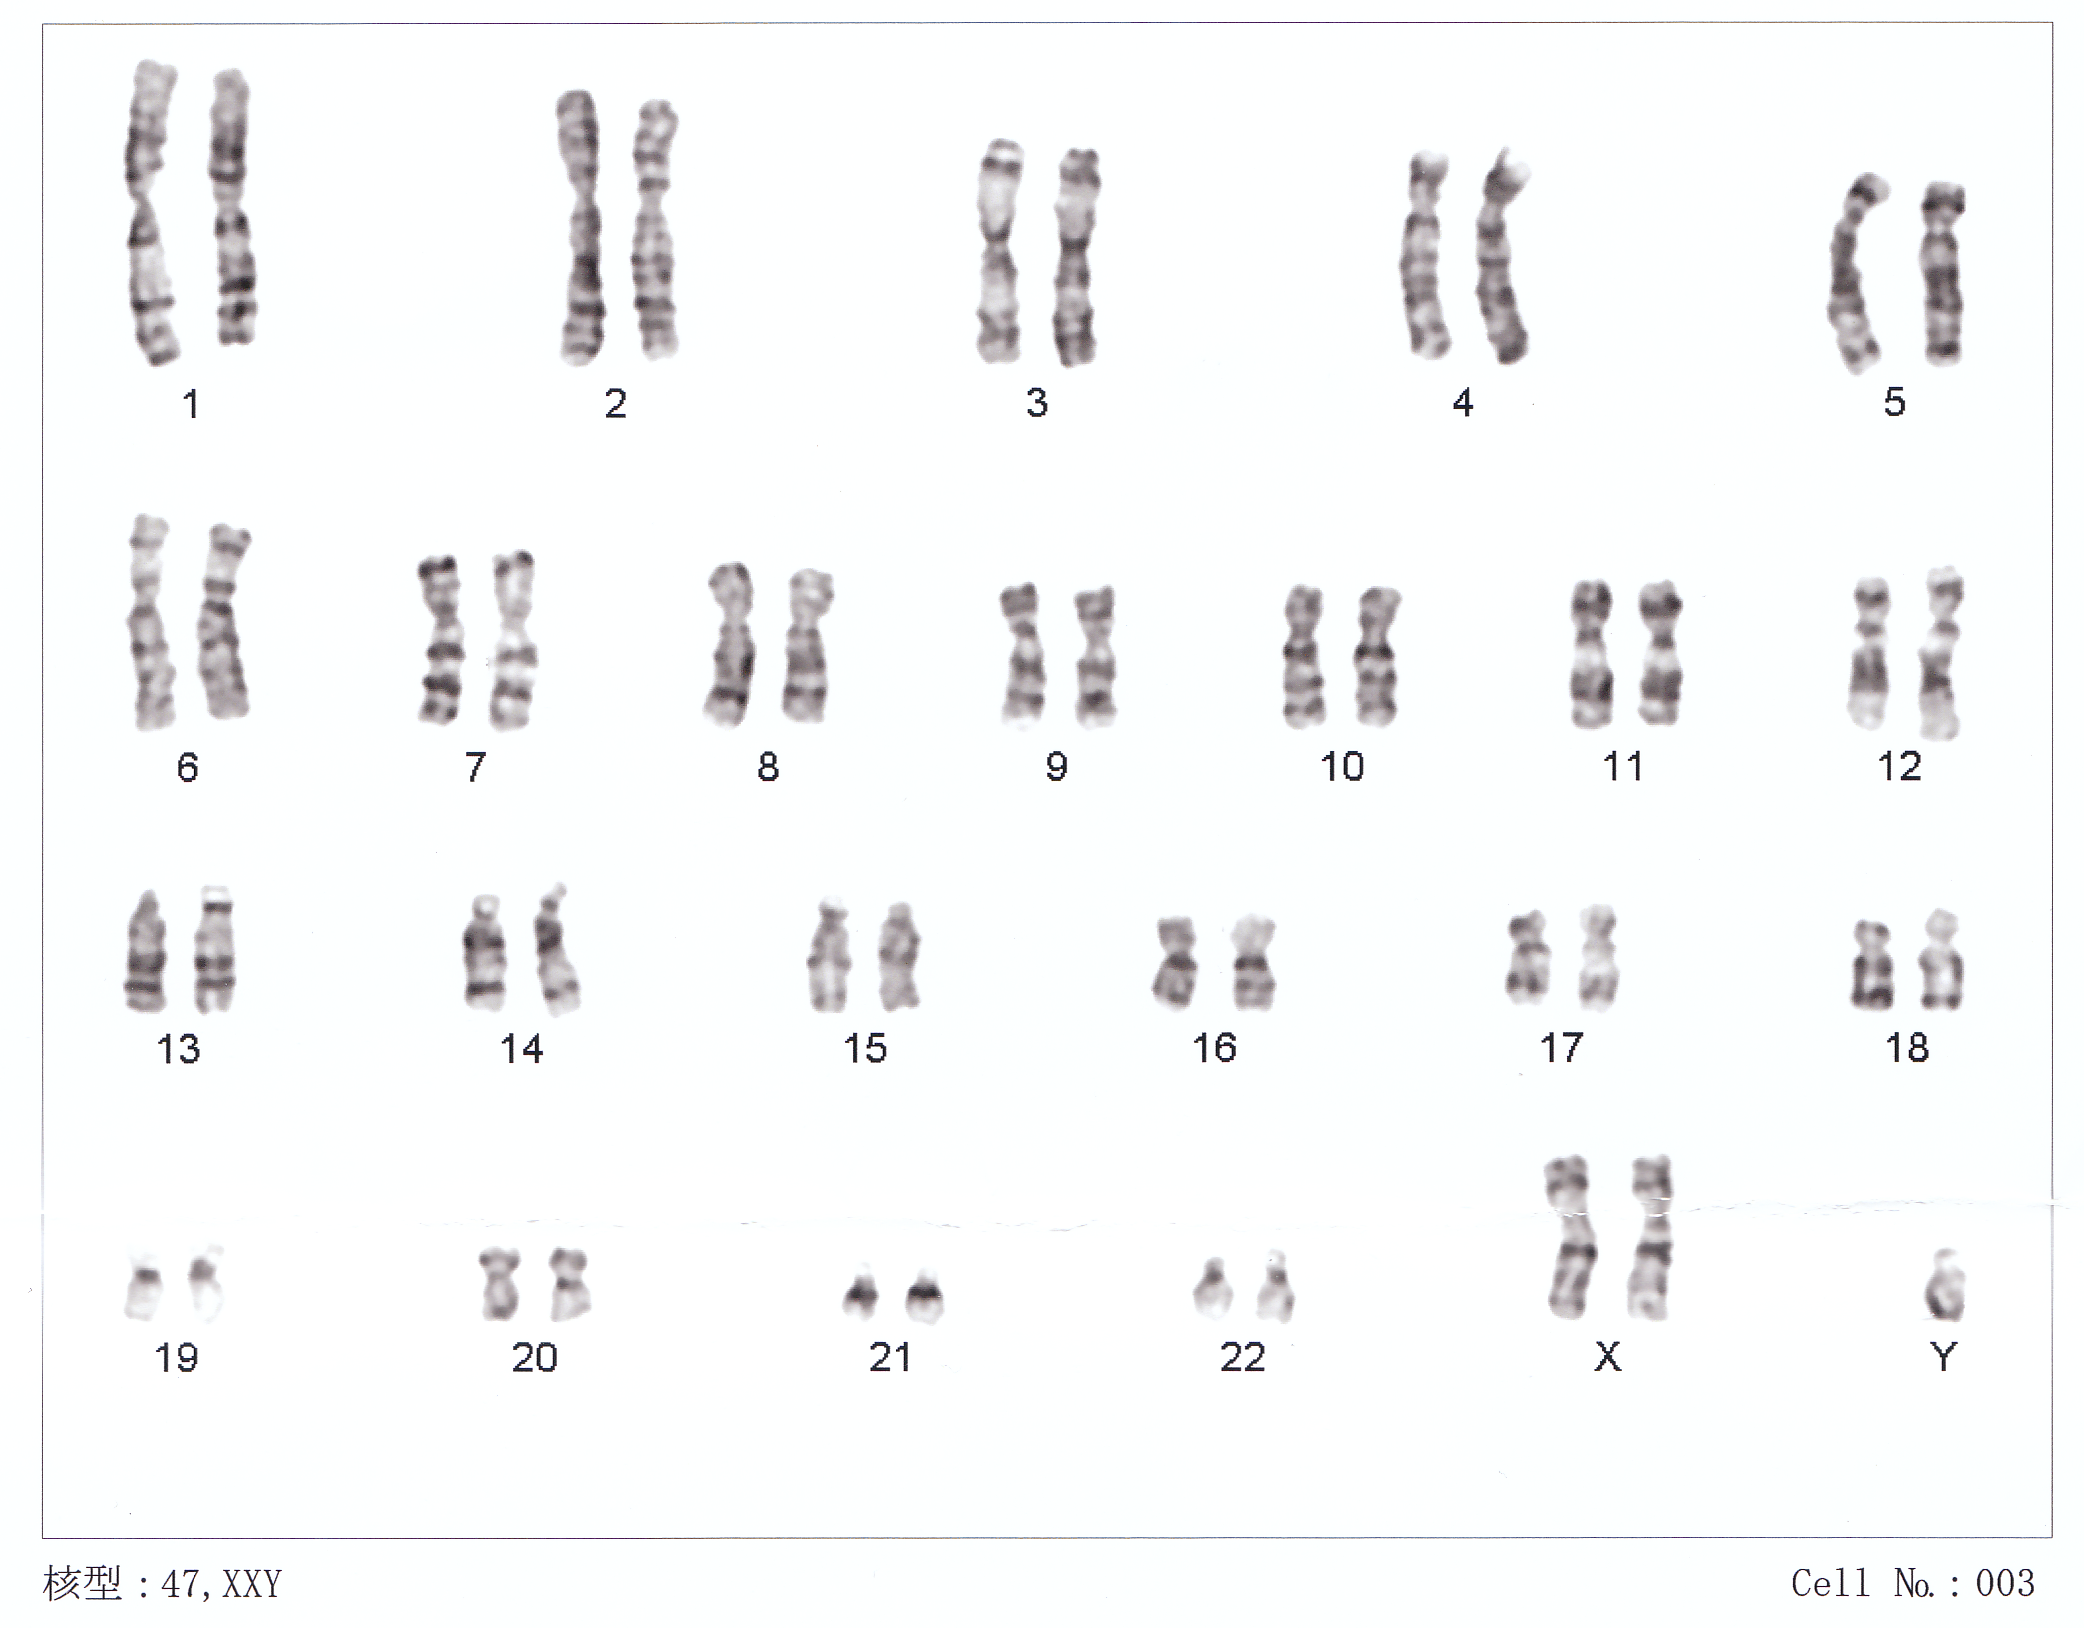 The chromosomes of a person with XXY, often called Klinefelter syndrome